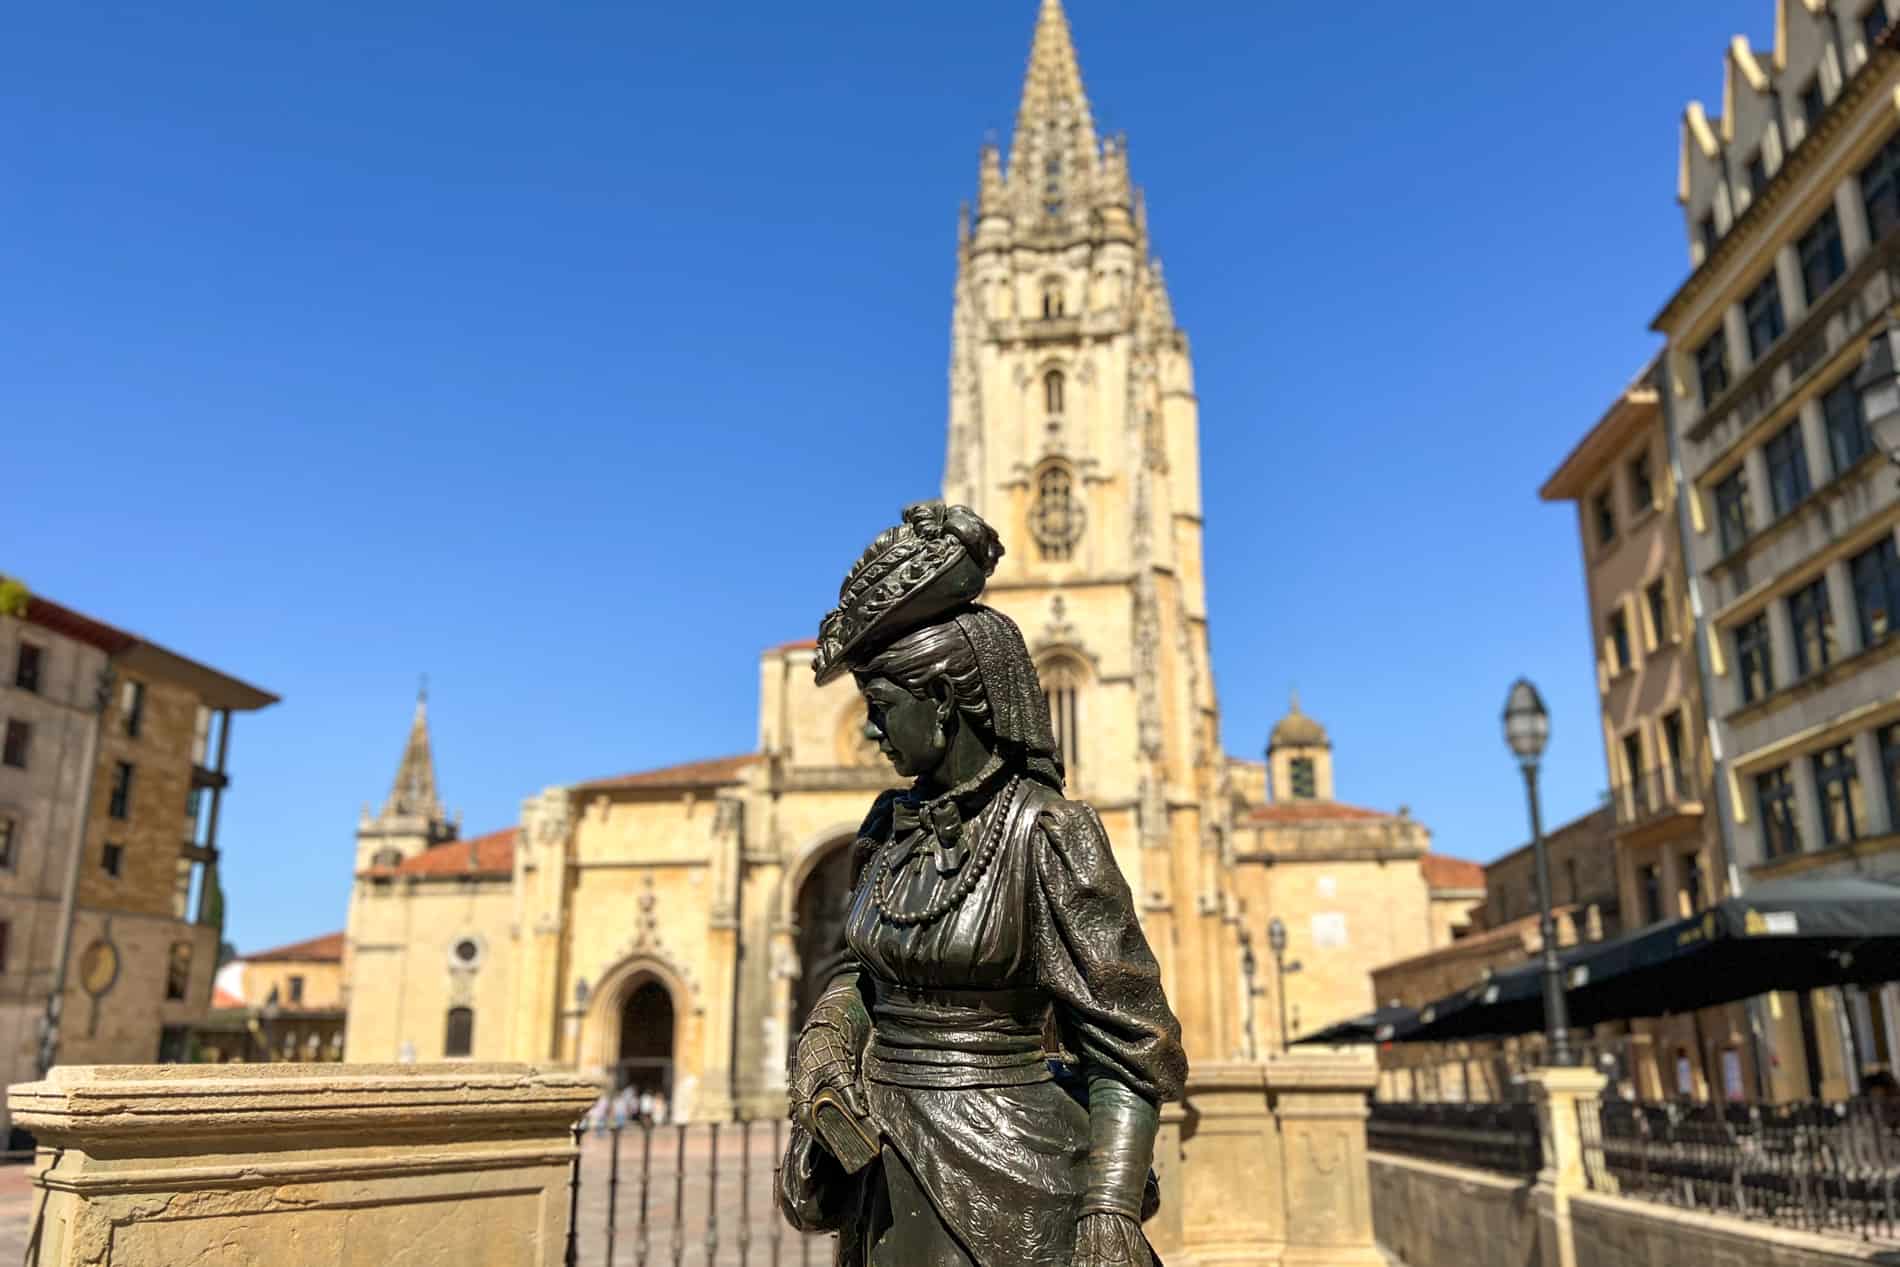 The La Regenta statue in Oviedo of a woman in elaborate dress and headpiece, standing in front of the city's cathedral.